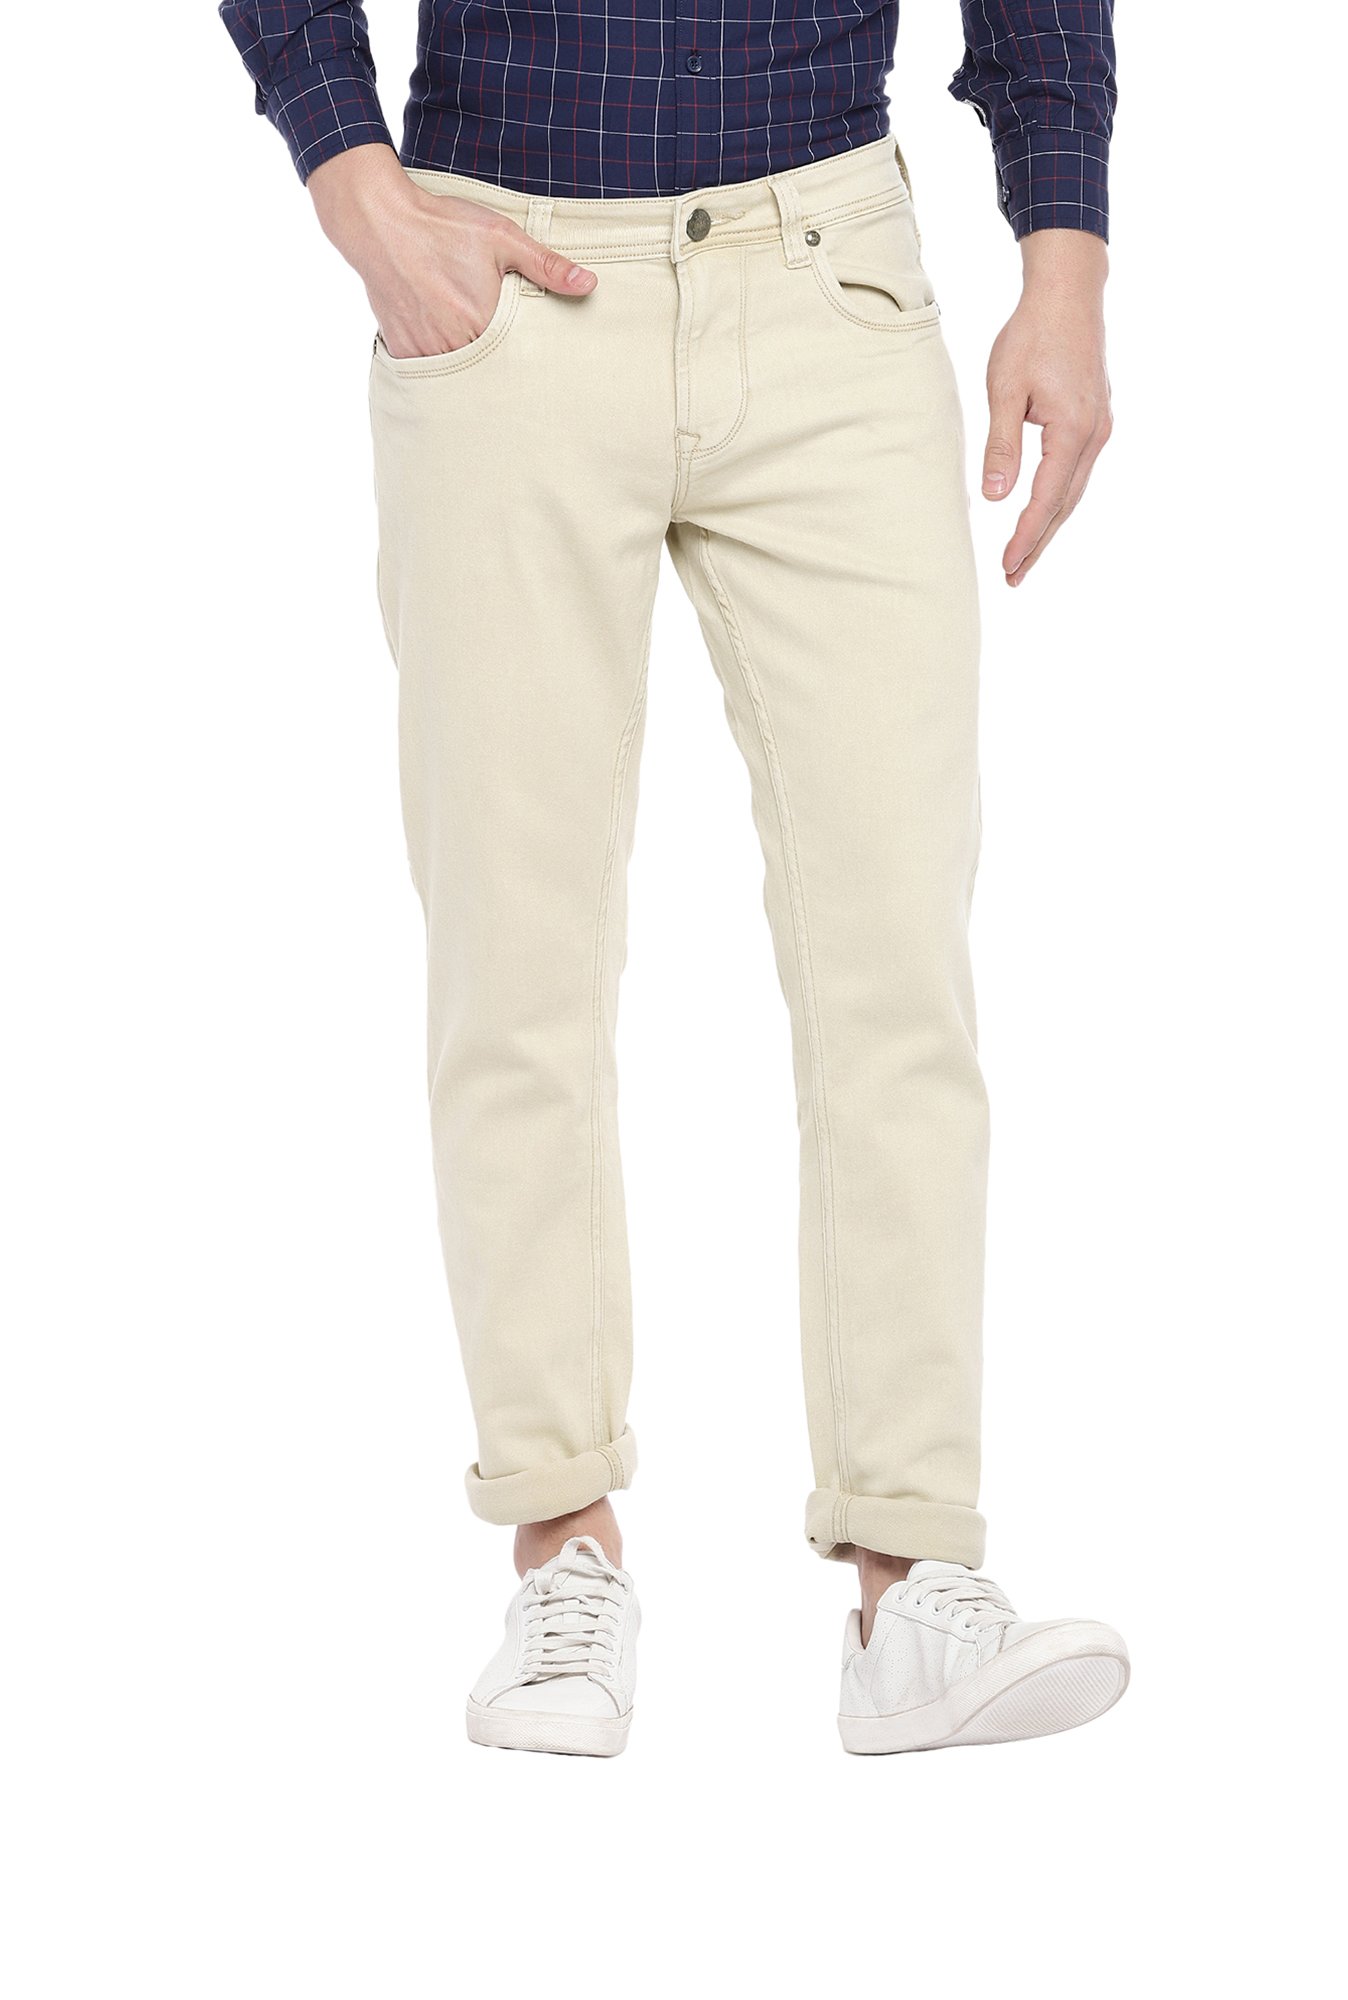 Lawman Pg3 Trousers  Buy Lawman Pg3 Trousers Online In India